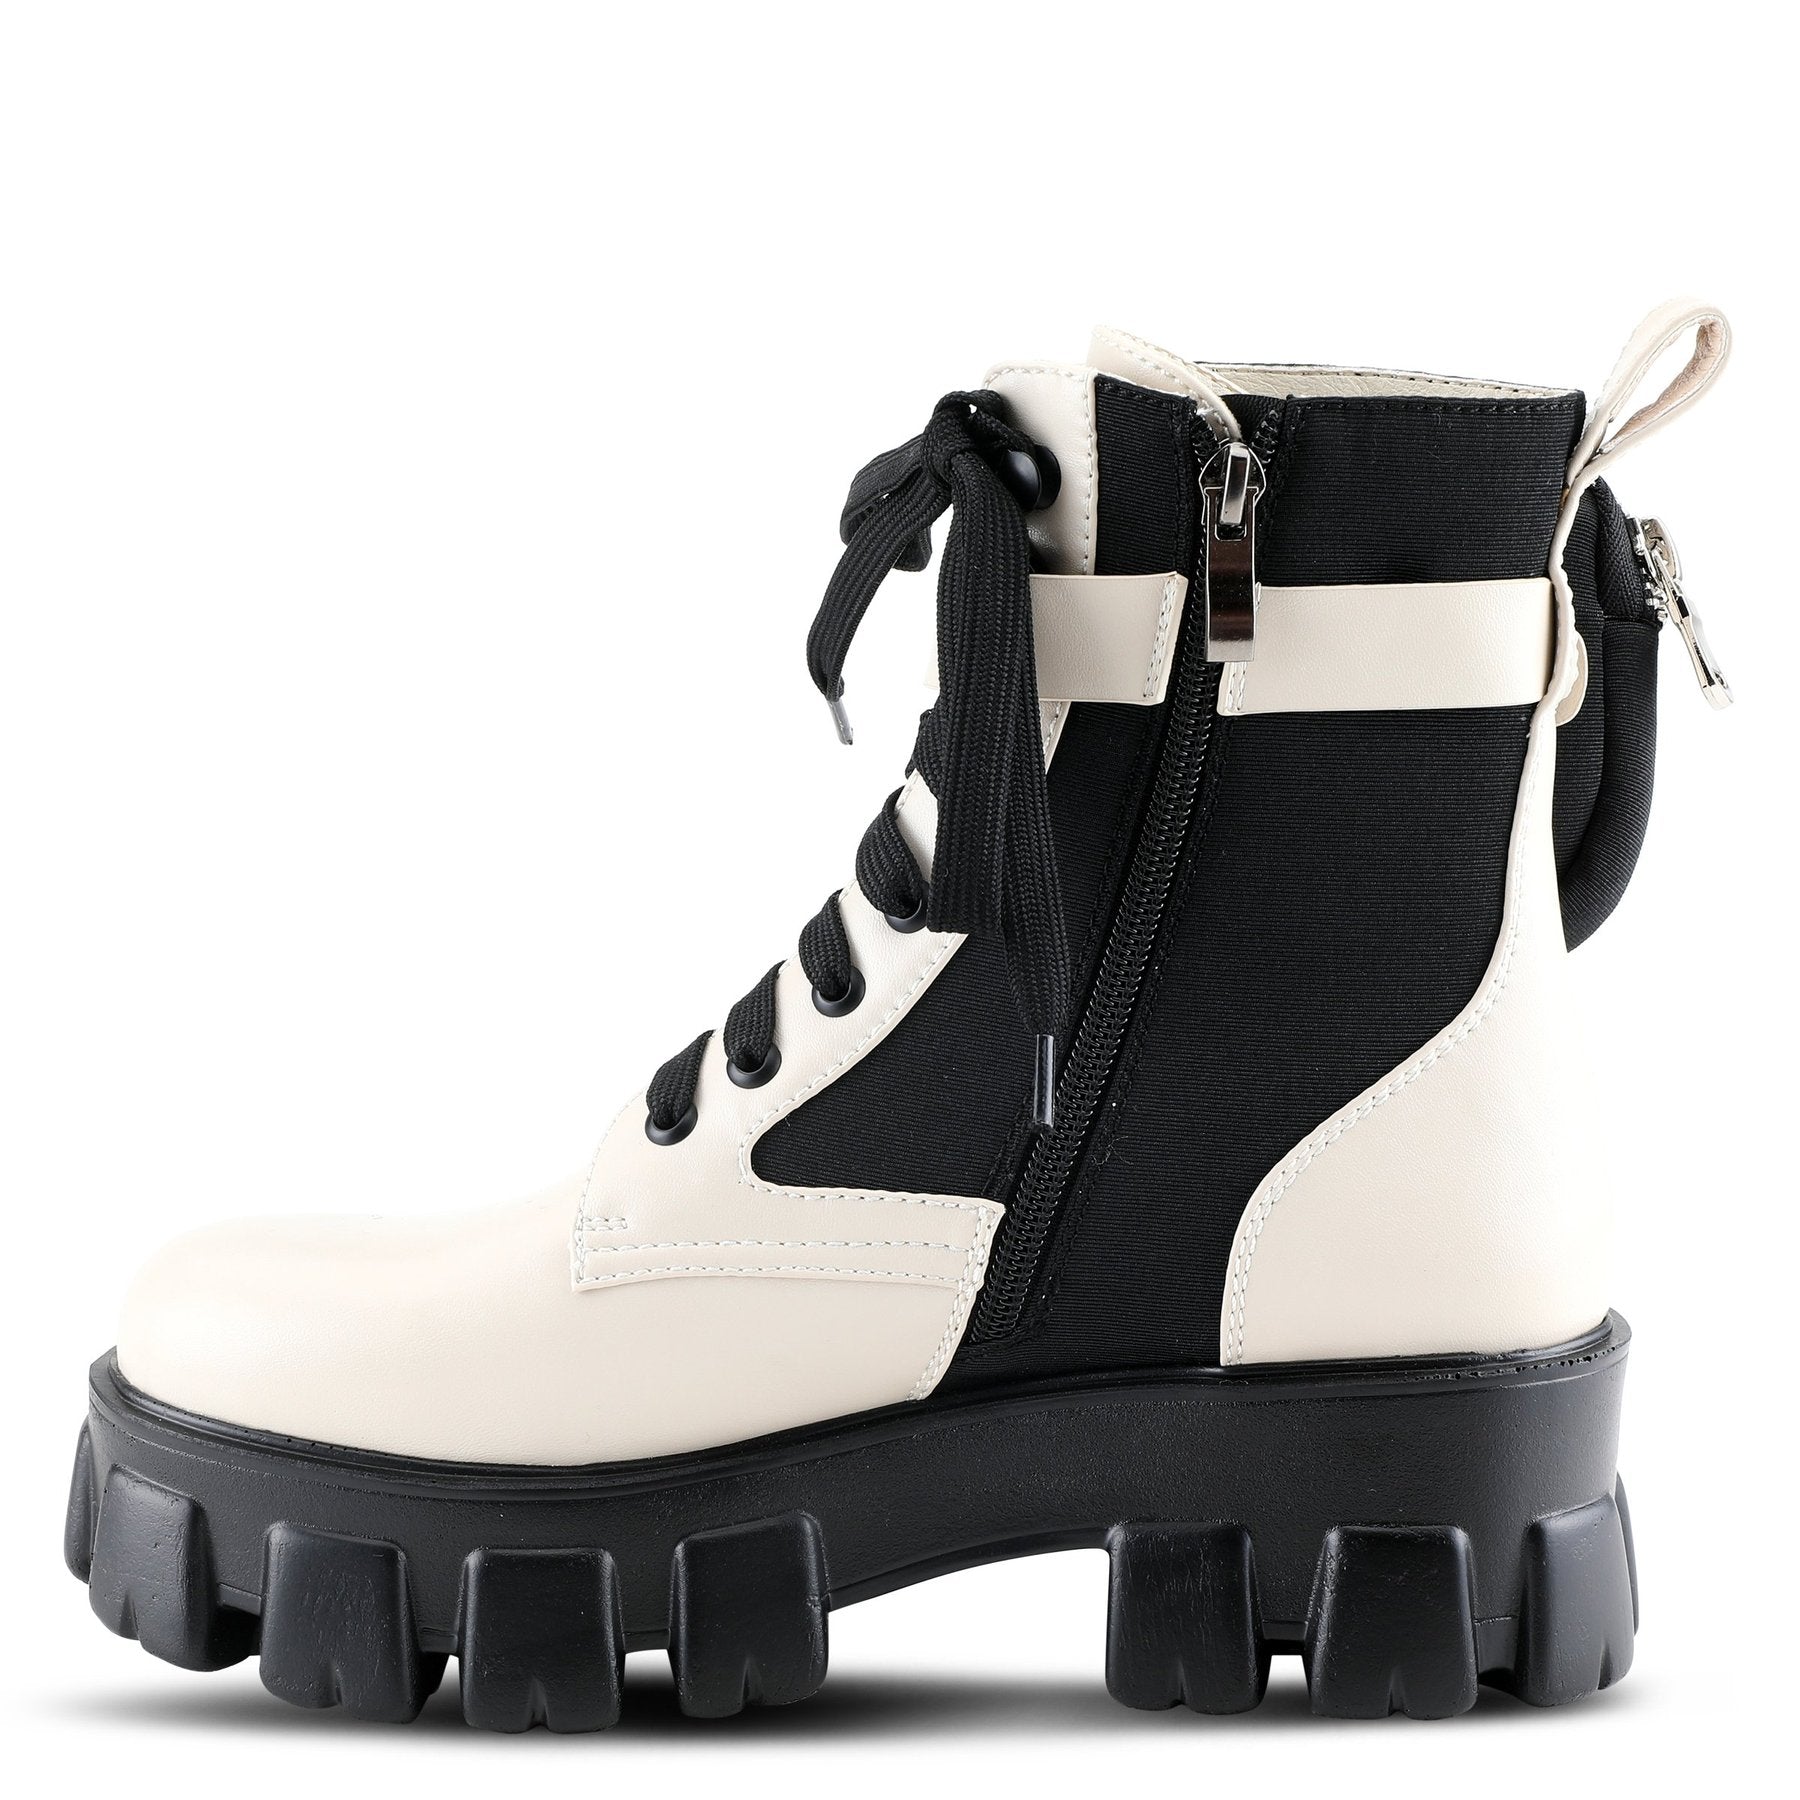 Inner side view of a azura stoked boot. This boot is beige and black with a black lace up front and a black lug sole. The boot has a decorative strap around the ankle and an inner zipper.